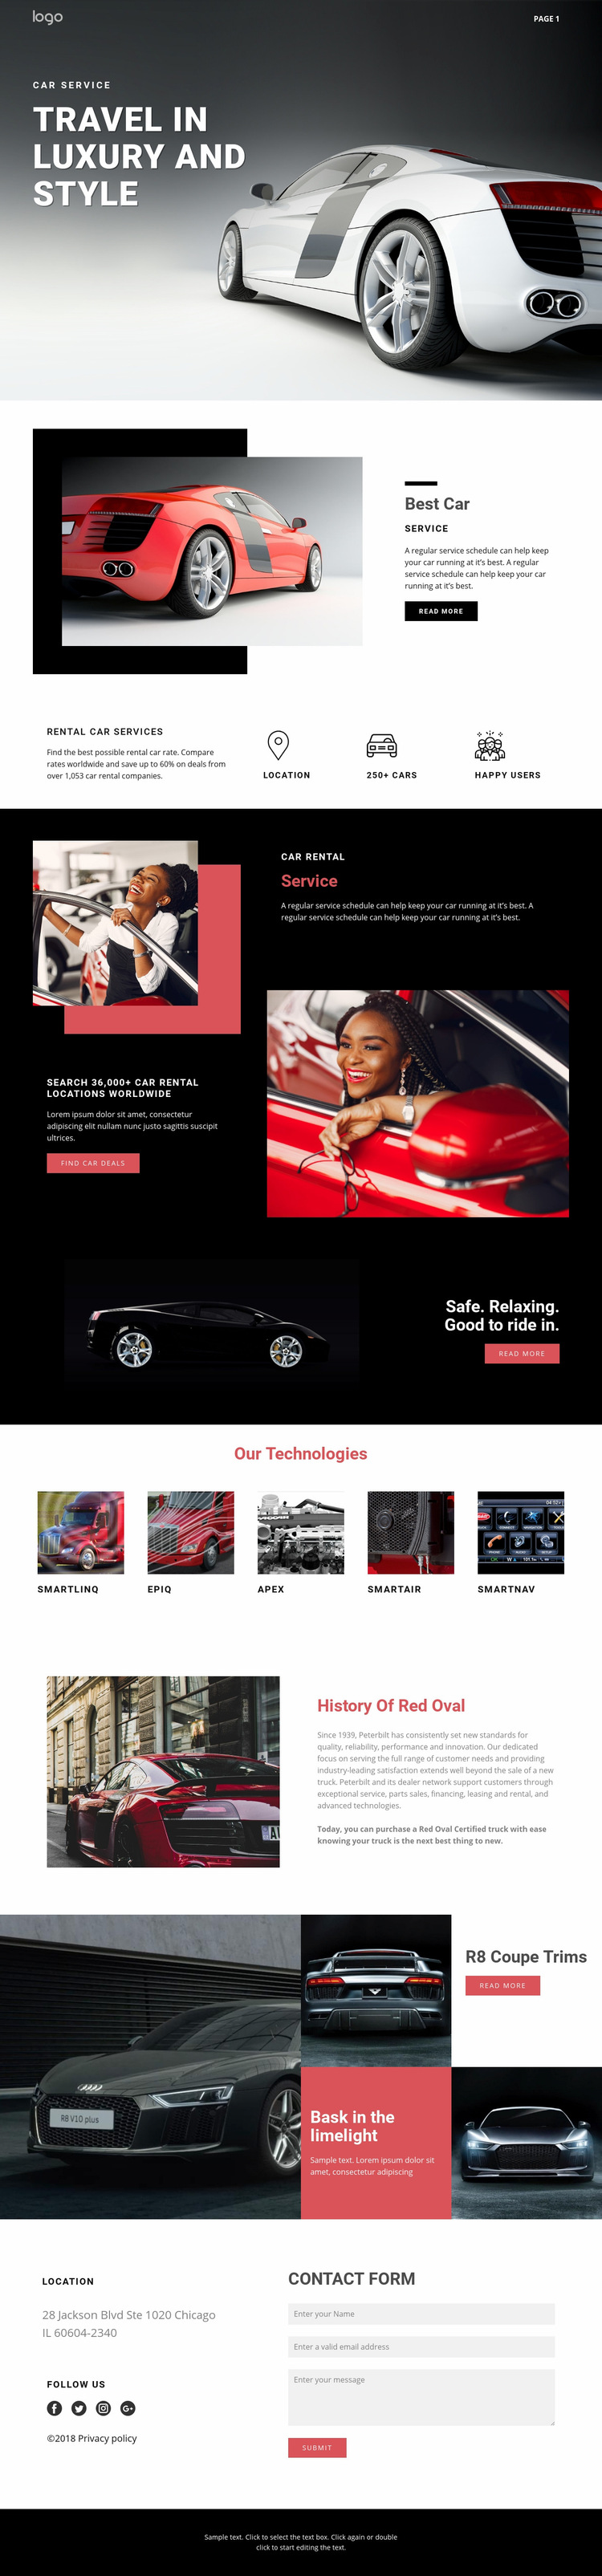 Traveling in luxury cars Web Page Design